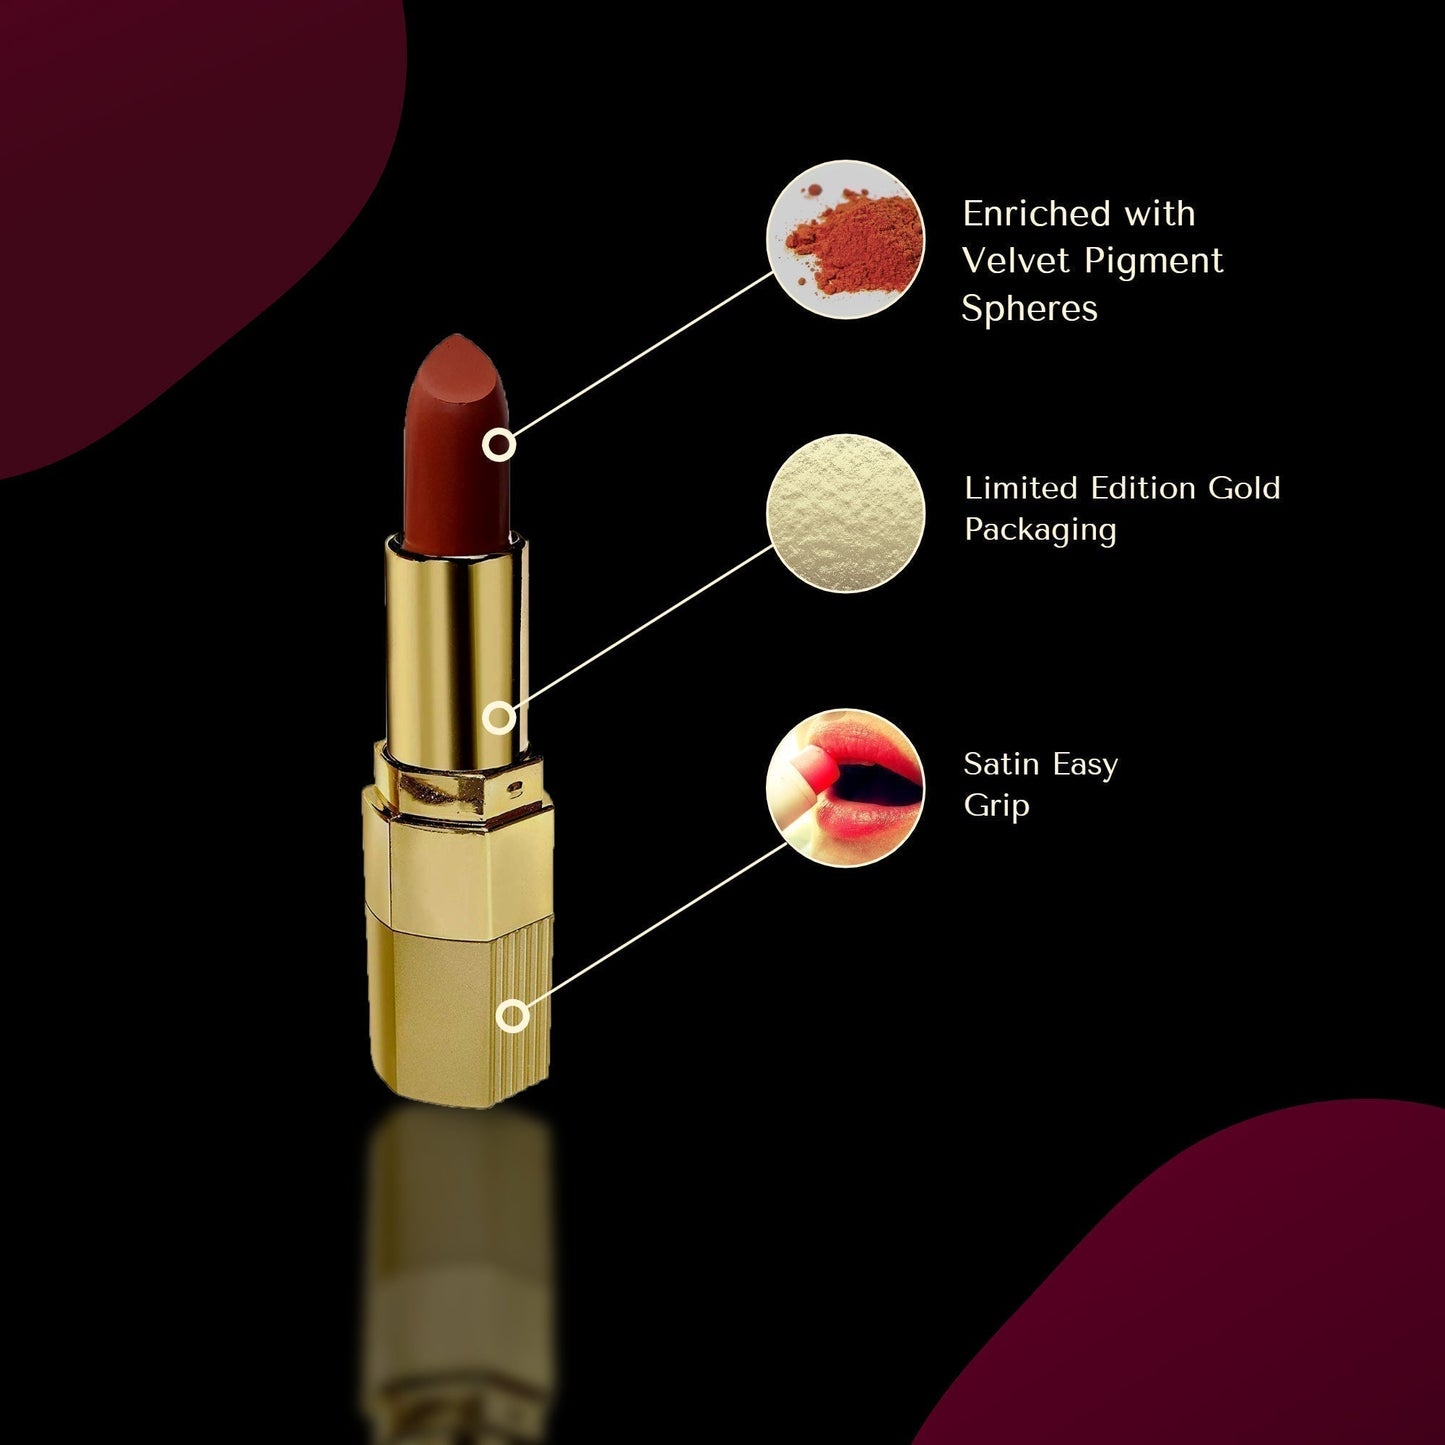 Krayons Desire Matte Lipstick, Highly Pigmented, Longlasting, 3.5g Each, Combo, Pack of 3 (Caramel Brown, Pink Mulbery, Scarlet Red)